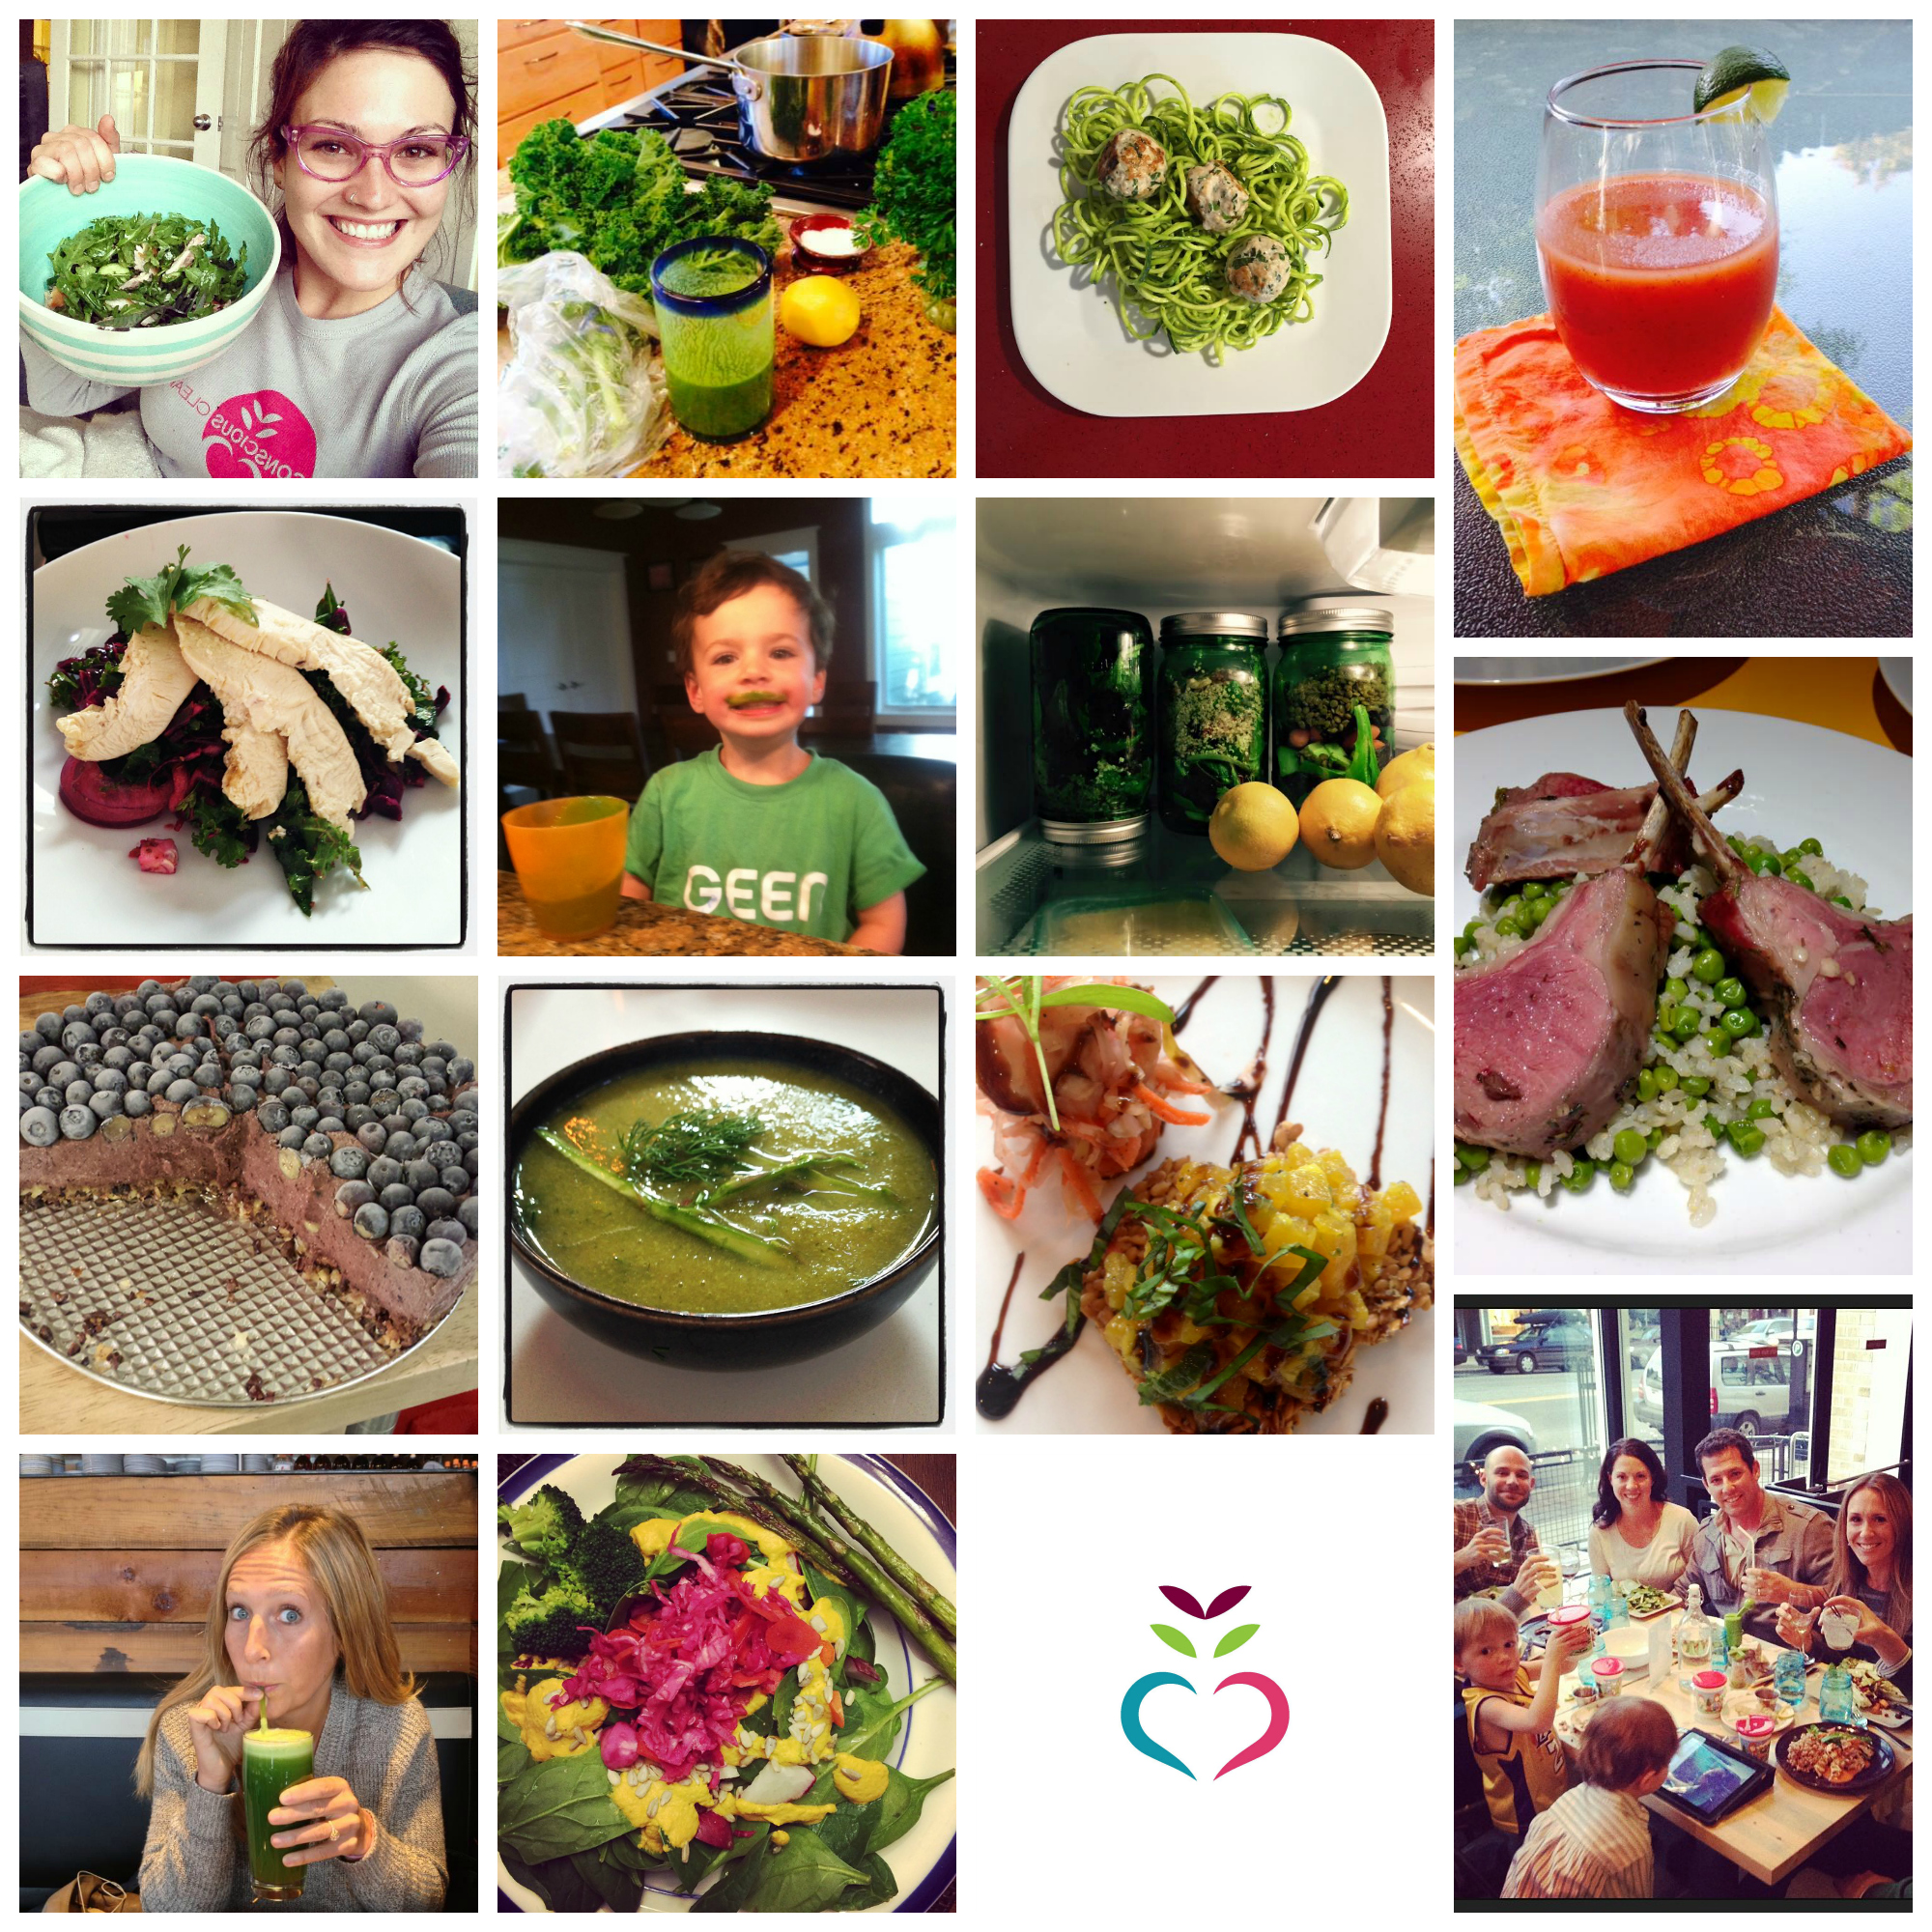 See What People Are Eating on the Conscious Cleanse